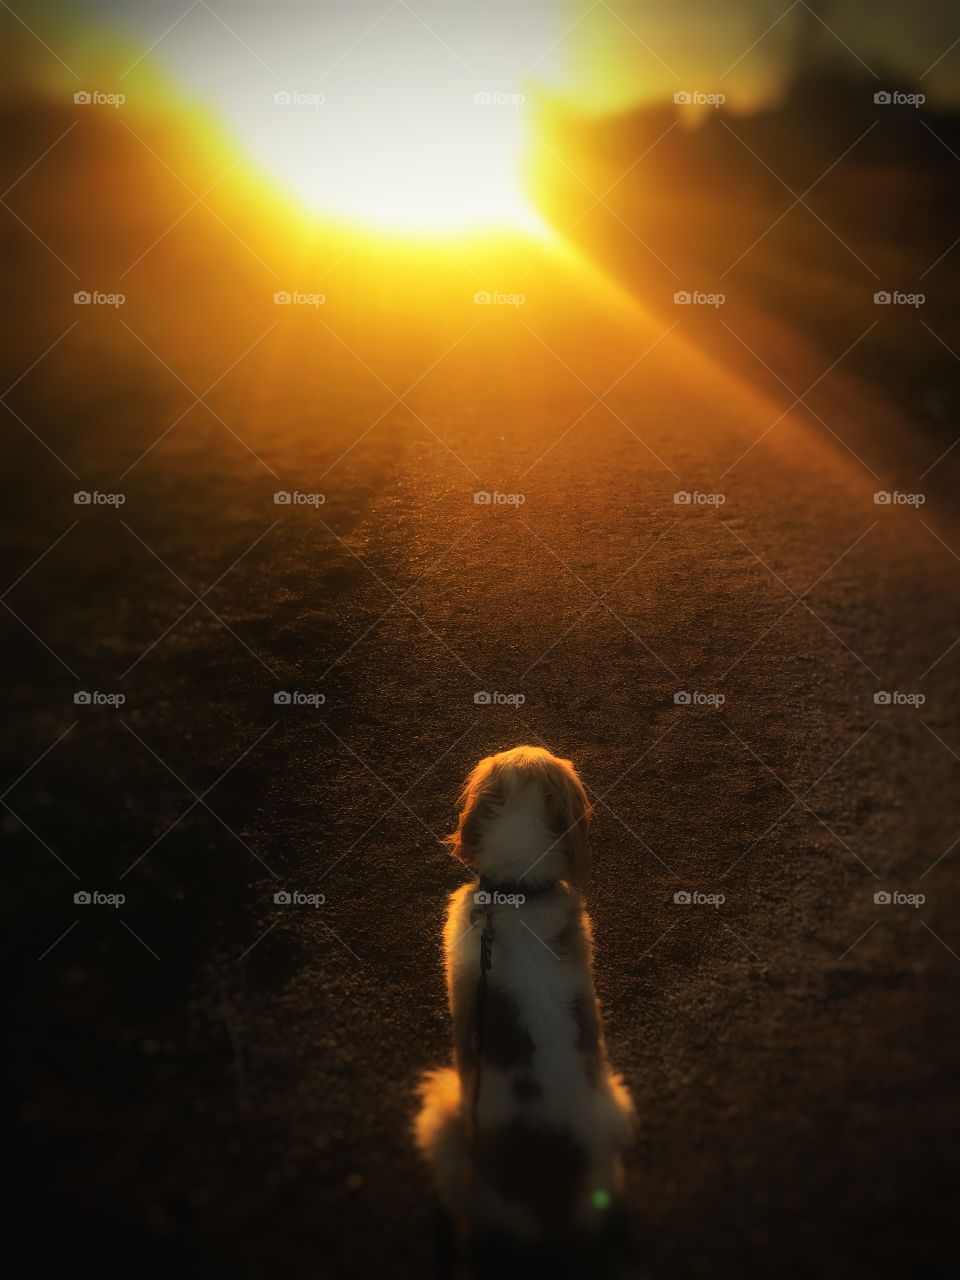 Dog in Sunset - Playing with light 